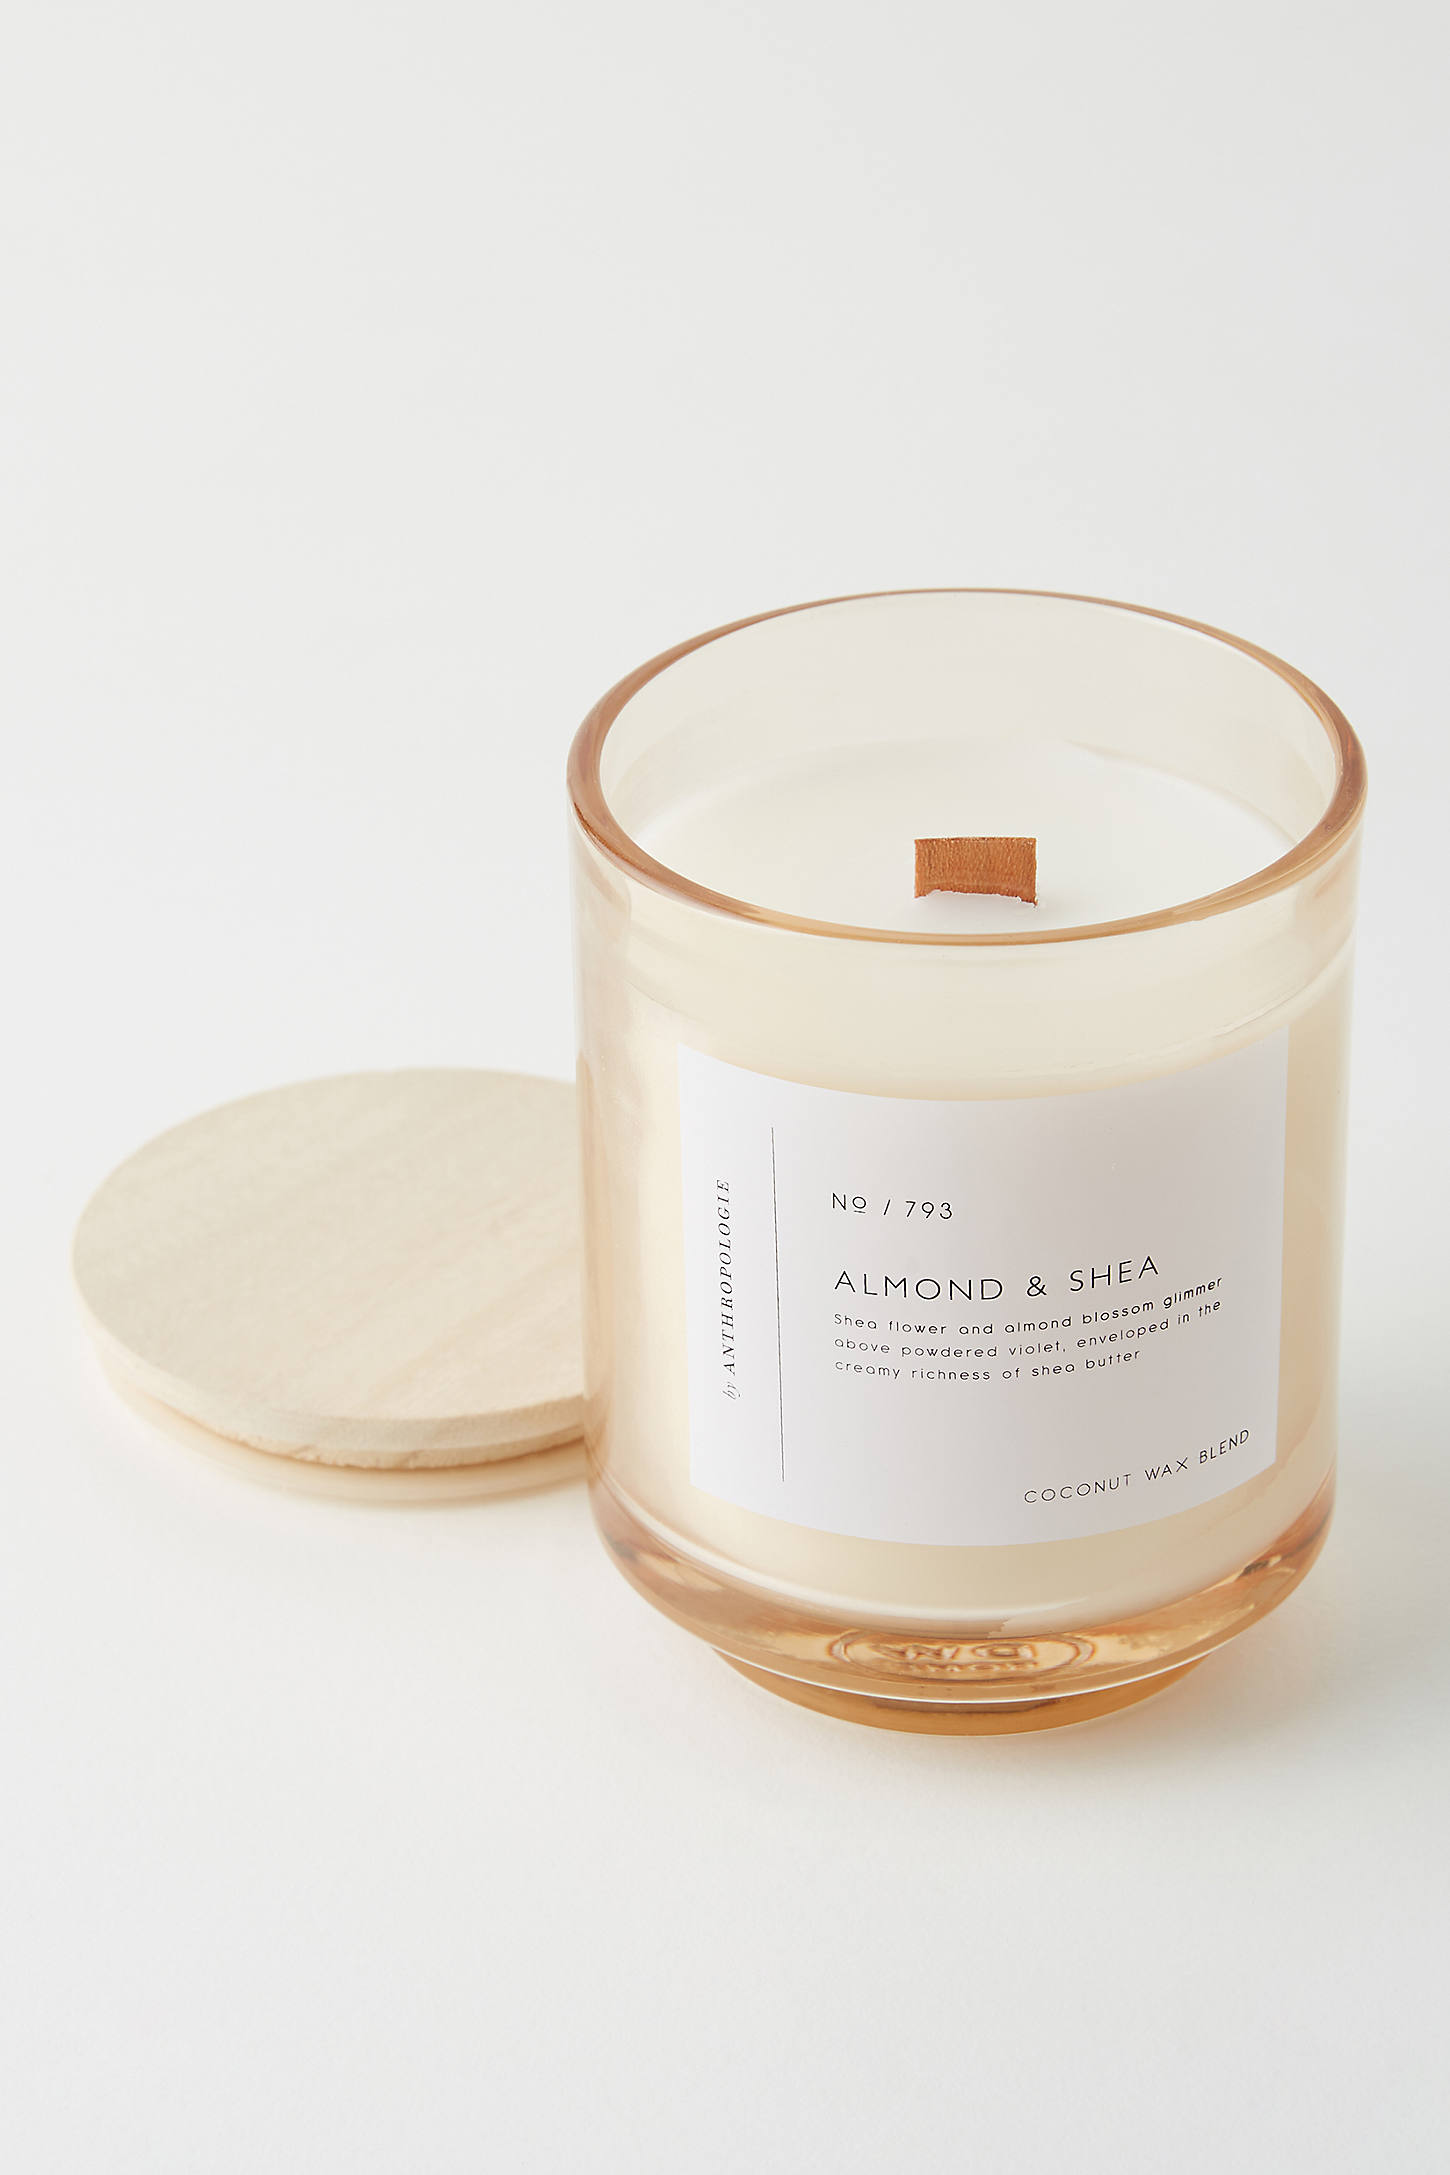 ANTHROPOLOGIE GEMMA WOOD WICK GLASS CANDLE,55611750